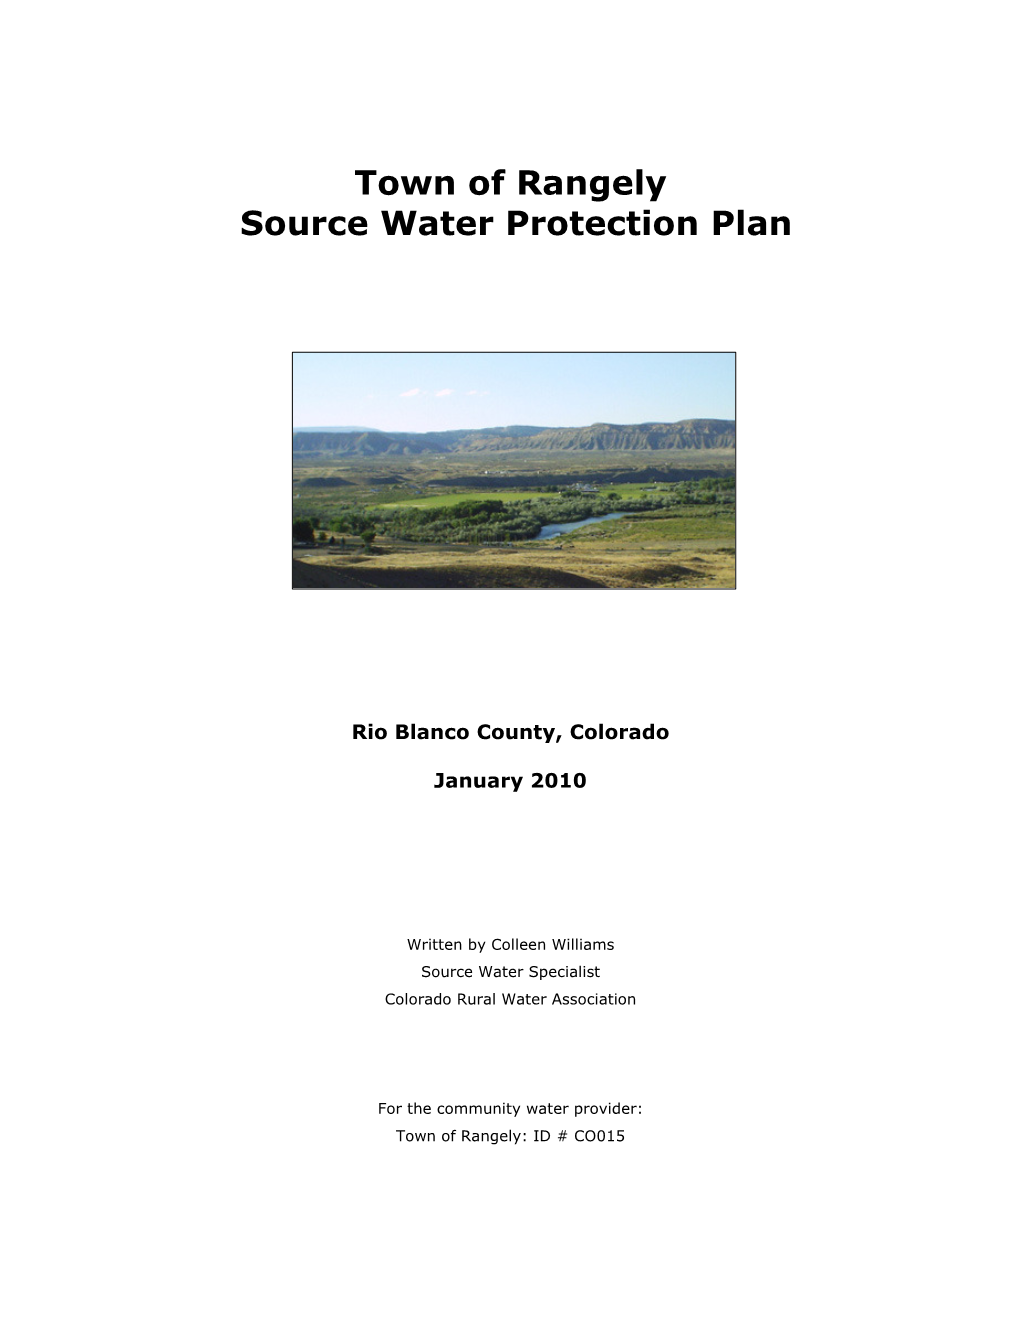 Town of Rangely Source Water Protection Plan